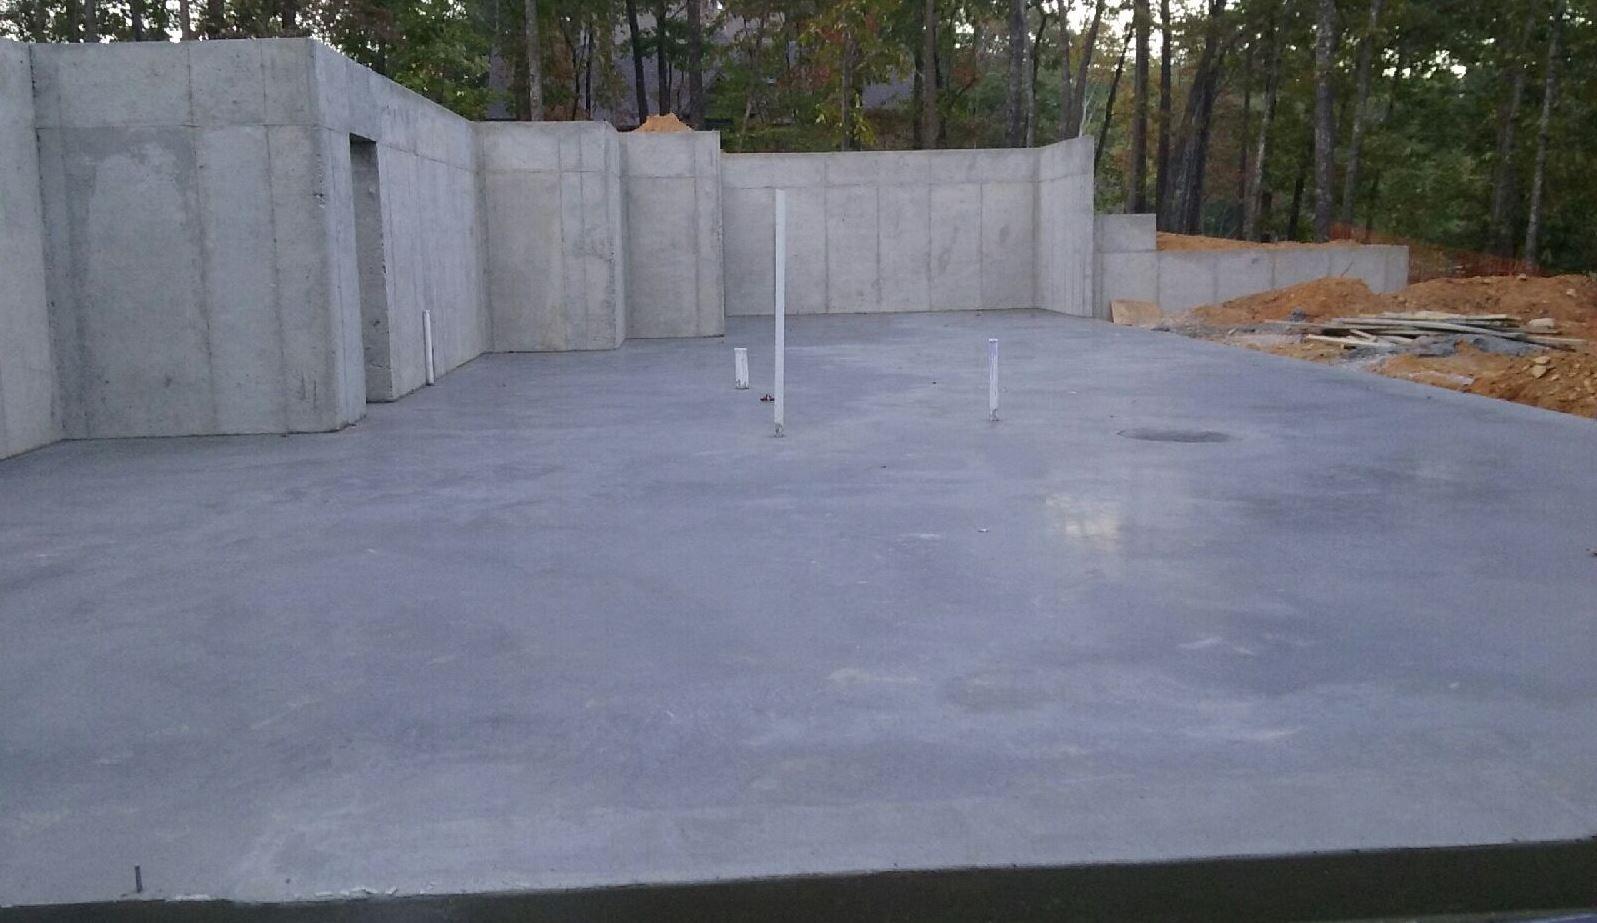 Concrete foundation basement slab for new home construction laid by NM Construction Group in Hoover, AL